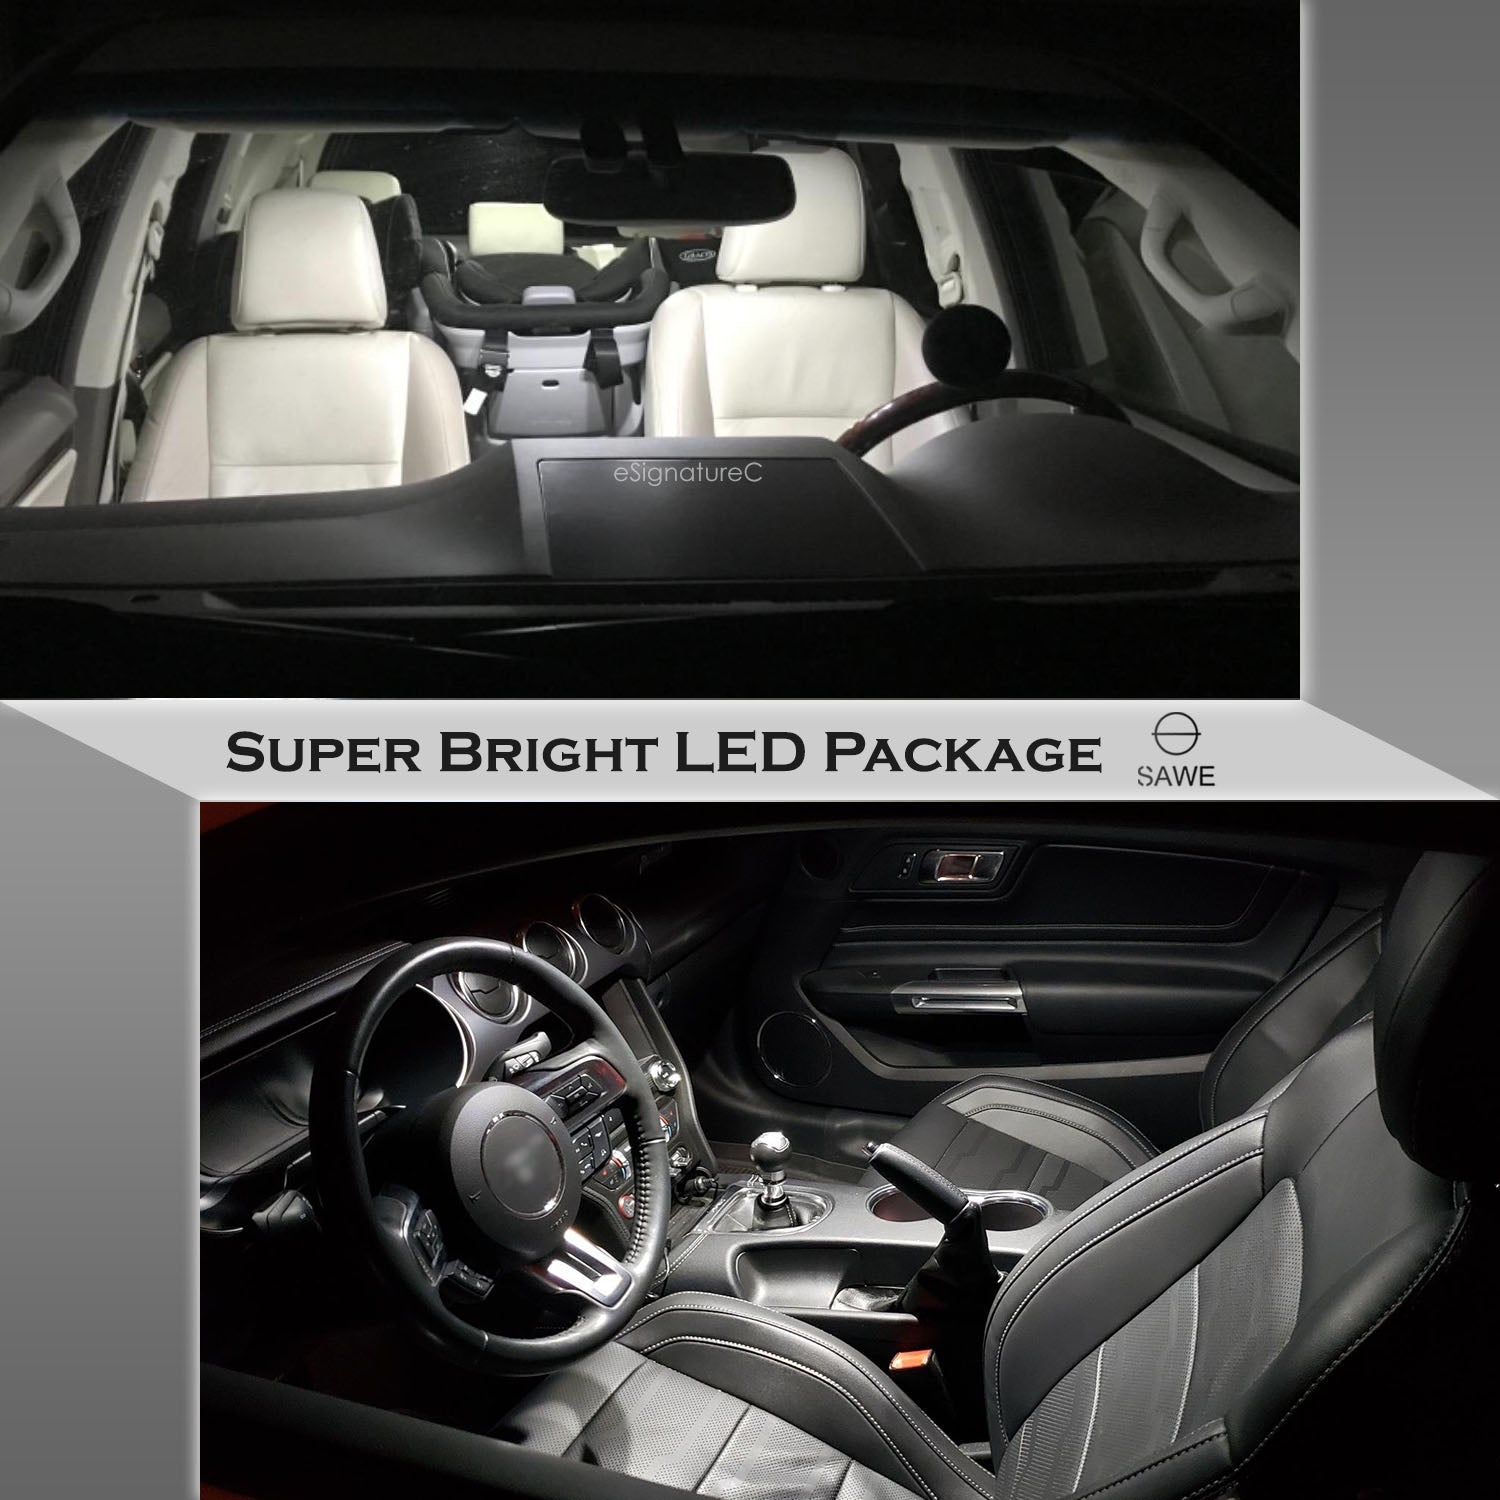 For Lexus ES350 ES300h Interior LED Lights - Dome & Map Light Bulbs Package Kit for 2013 - 2018 - White